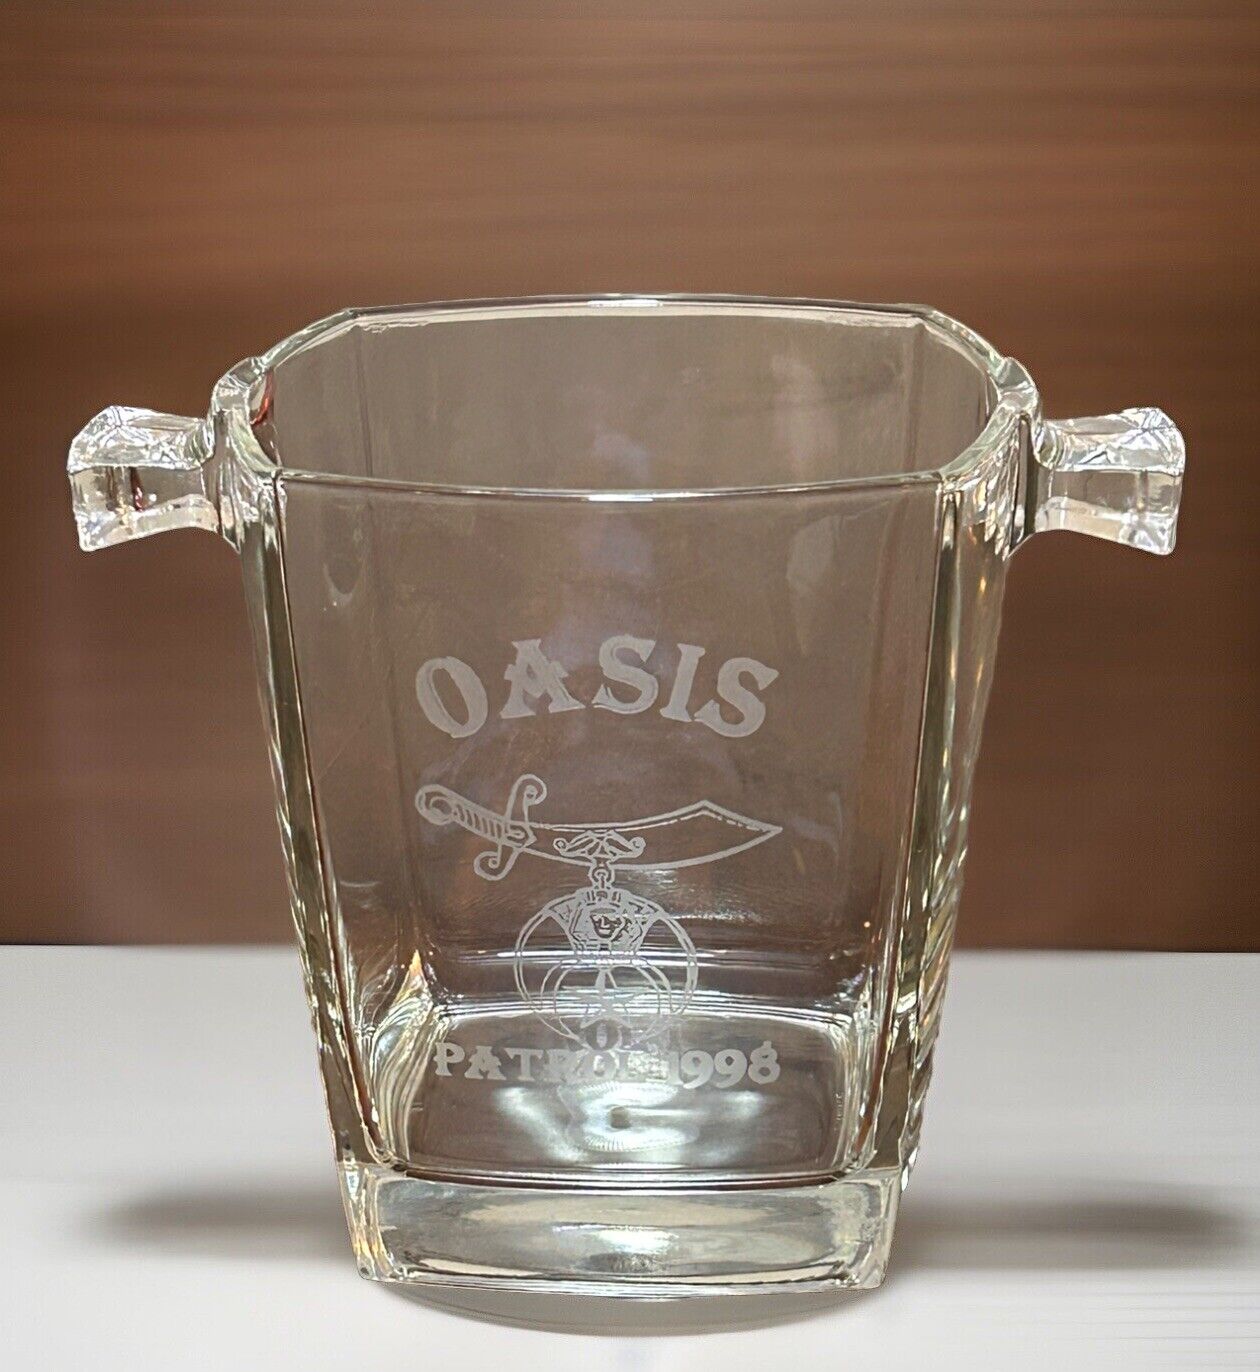 Shriner Oasis Patrol 1998 Etched Glass Ice Champagne Bucket Made In France